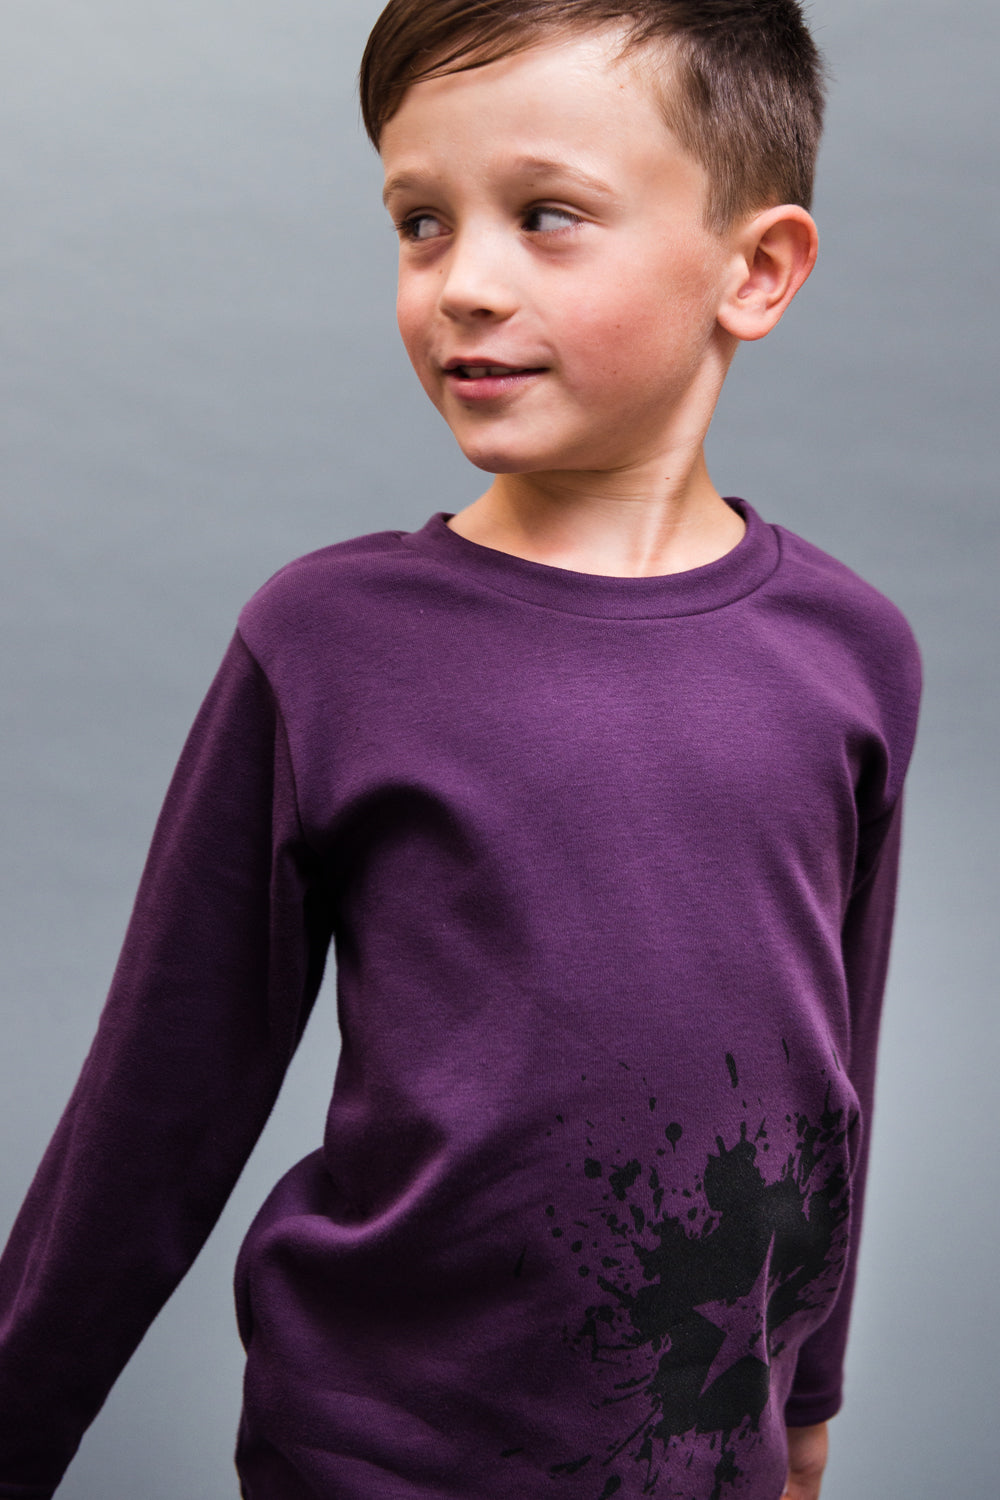 Plum coloured long sleeve t-shirt 100% cotton with ink splat star design